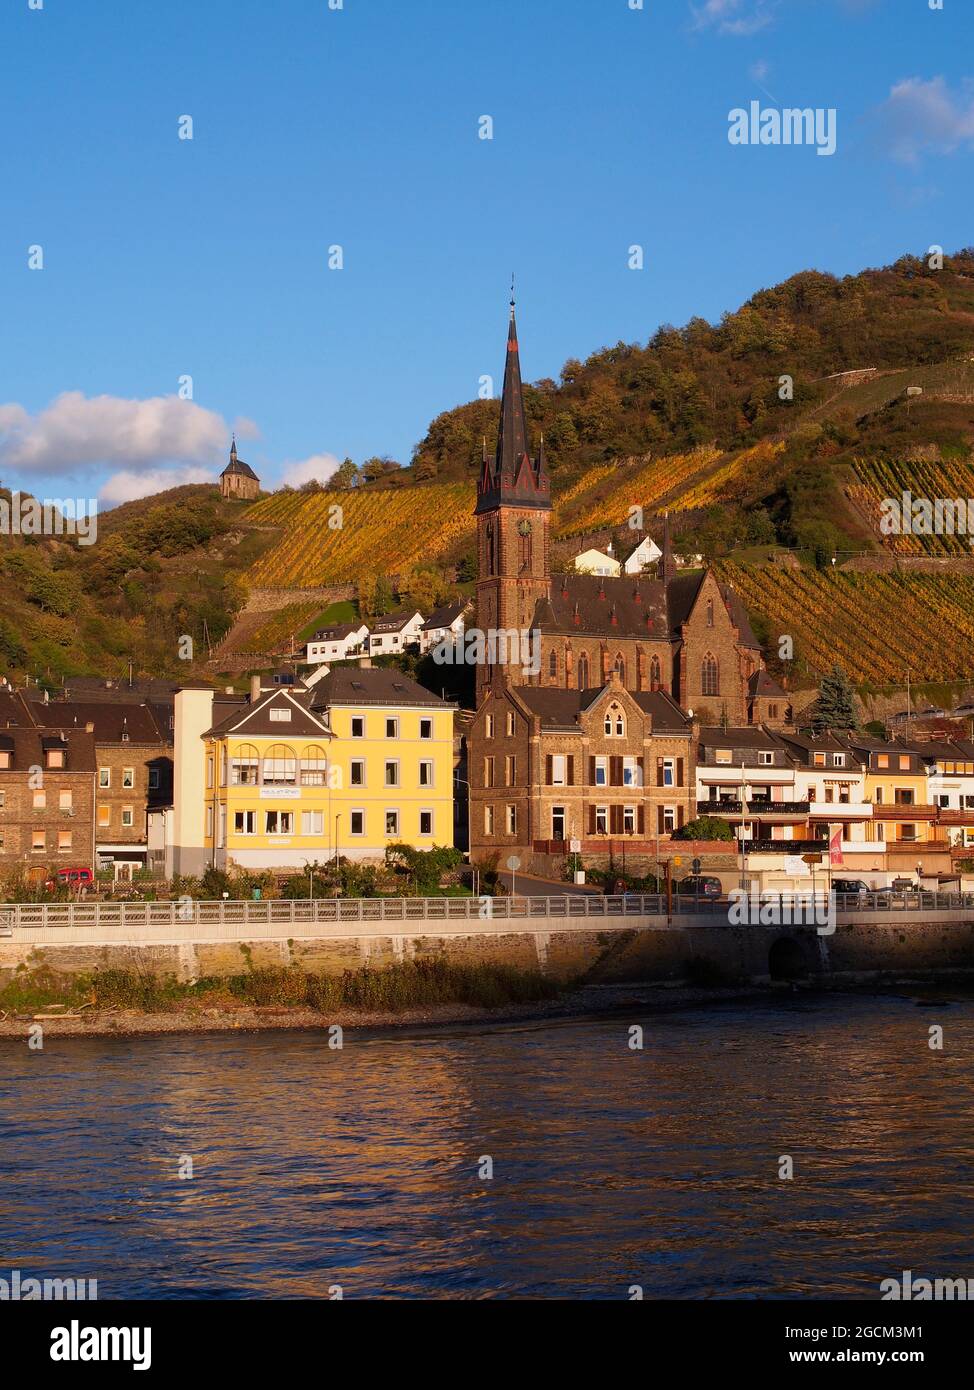 Rhineland. Two German churches on the River Rhine. One in the town Bacharach on the River Bank the other on the hillside overlooking the tow Stock Photo